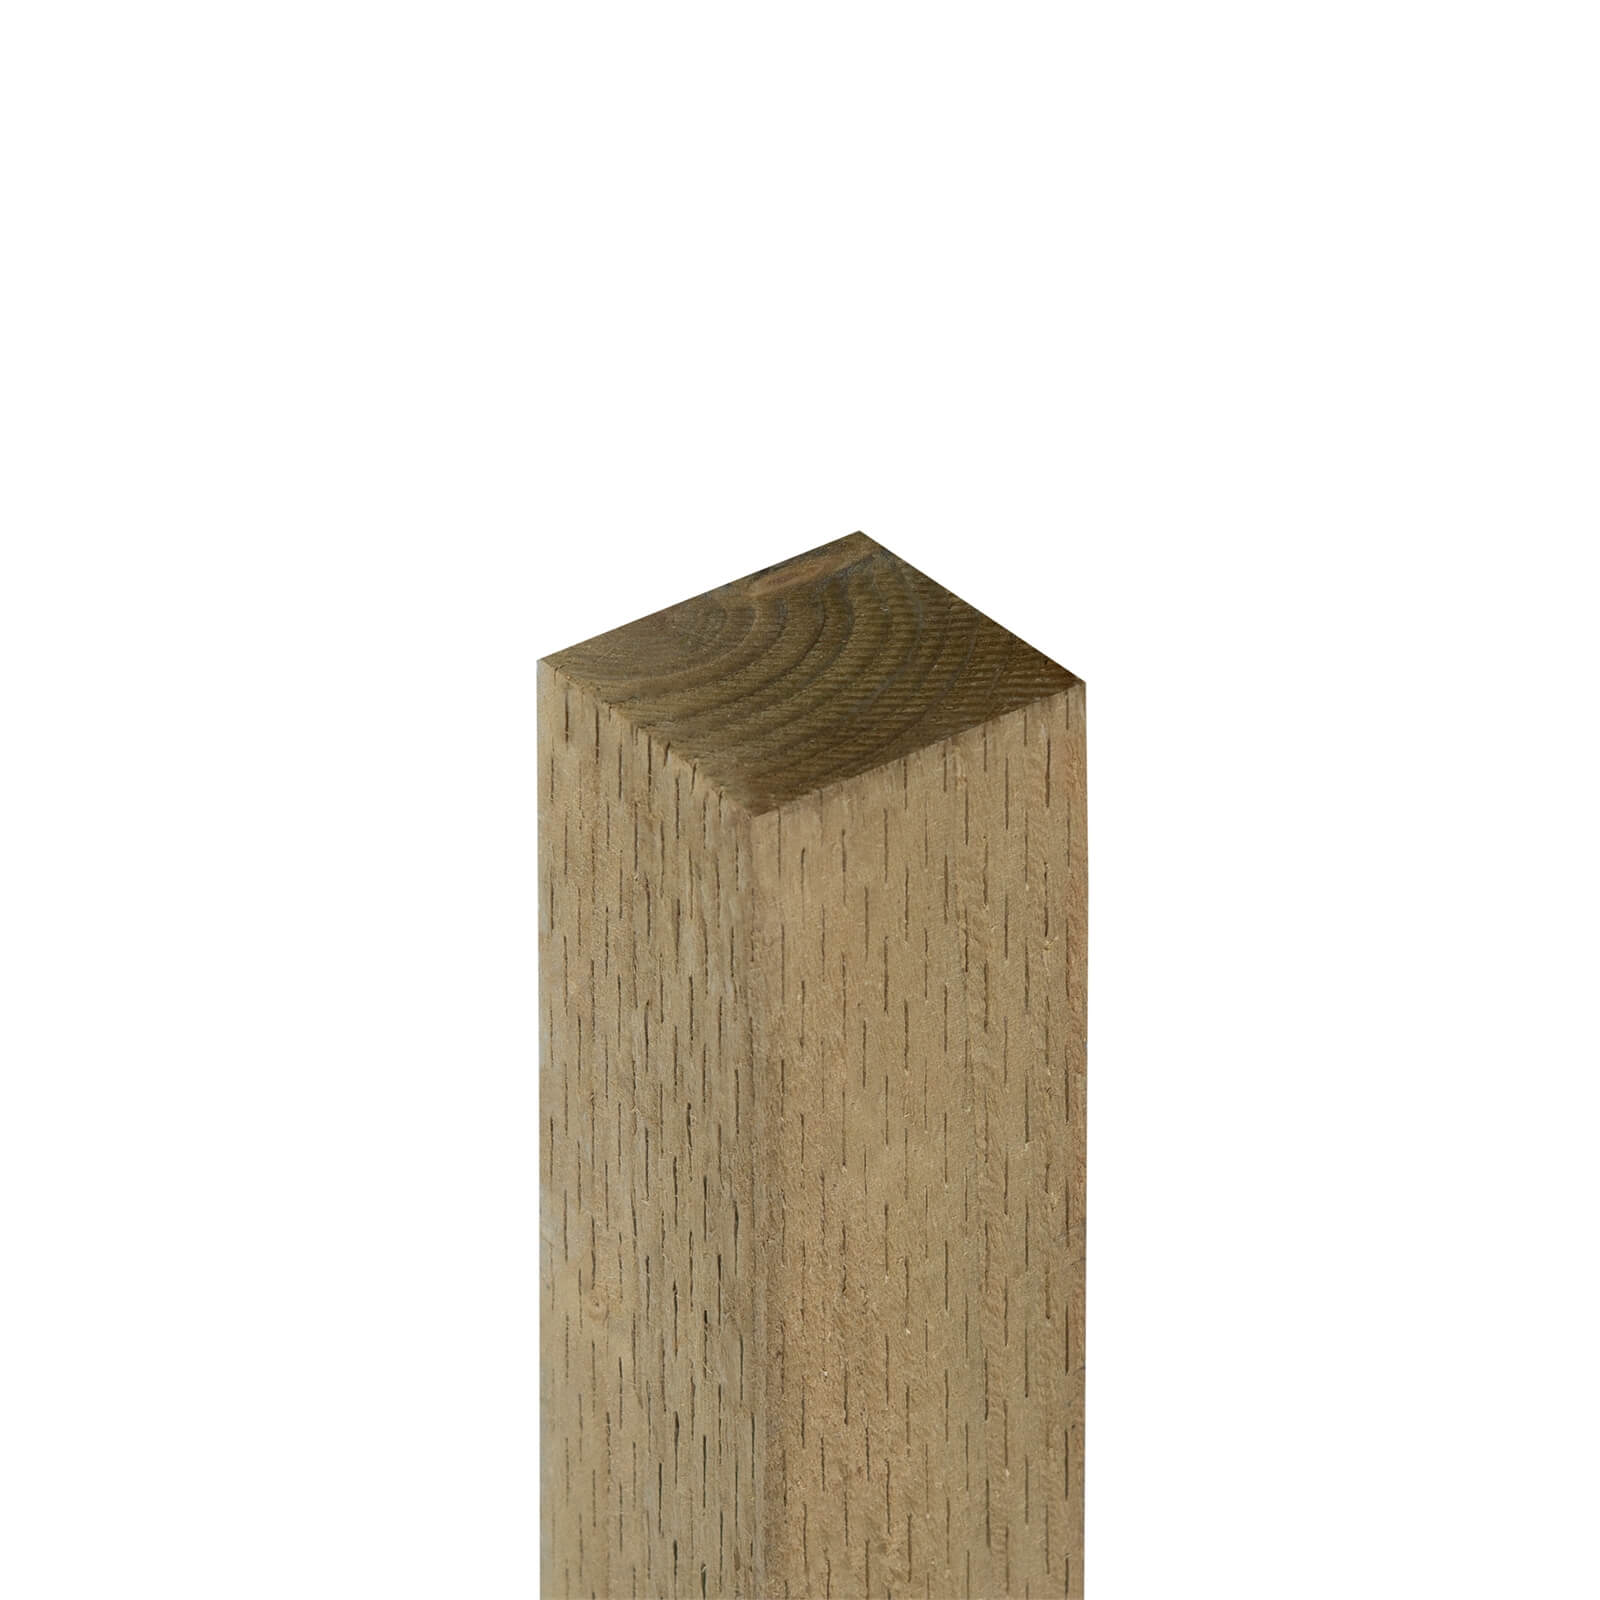 Green Incised Fence Post 2.4m (2400 x 75 x 75mm) - Pack of 5